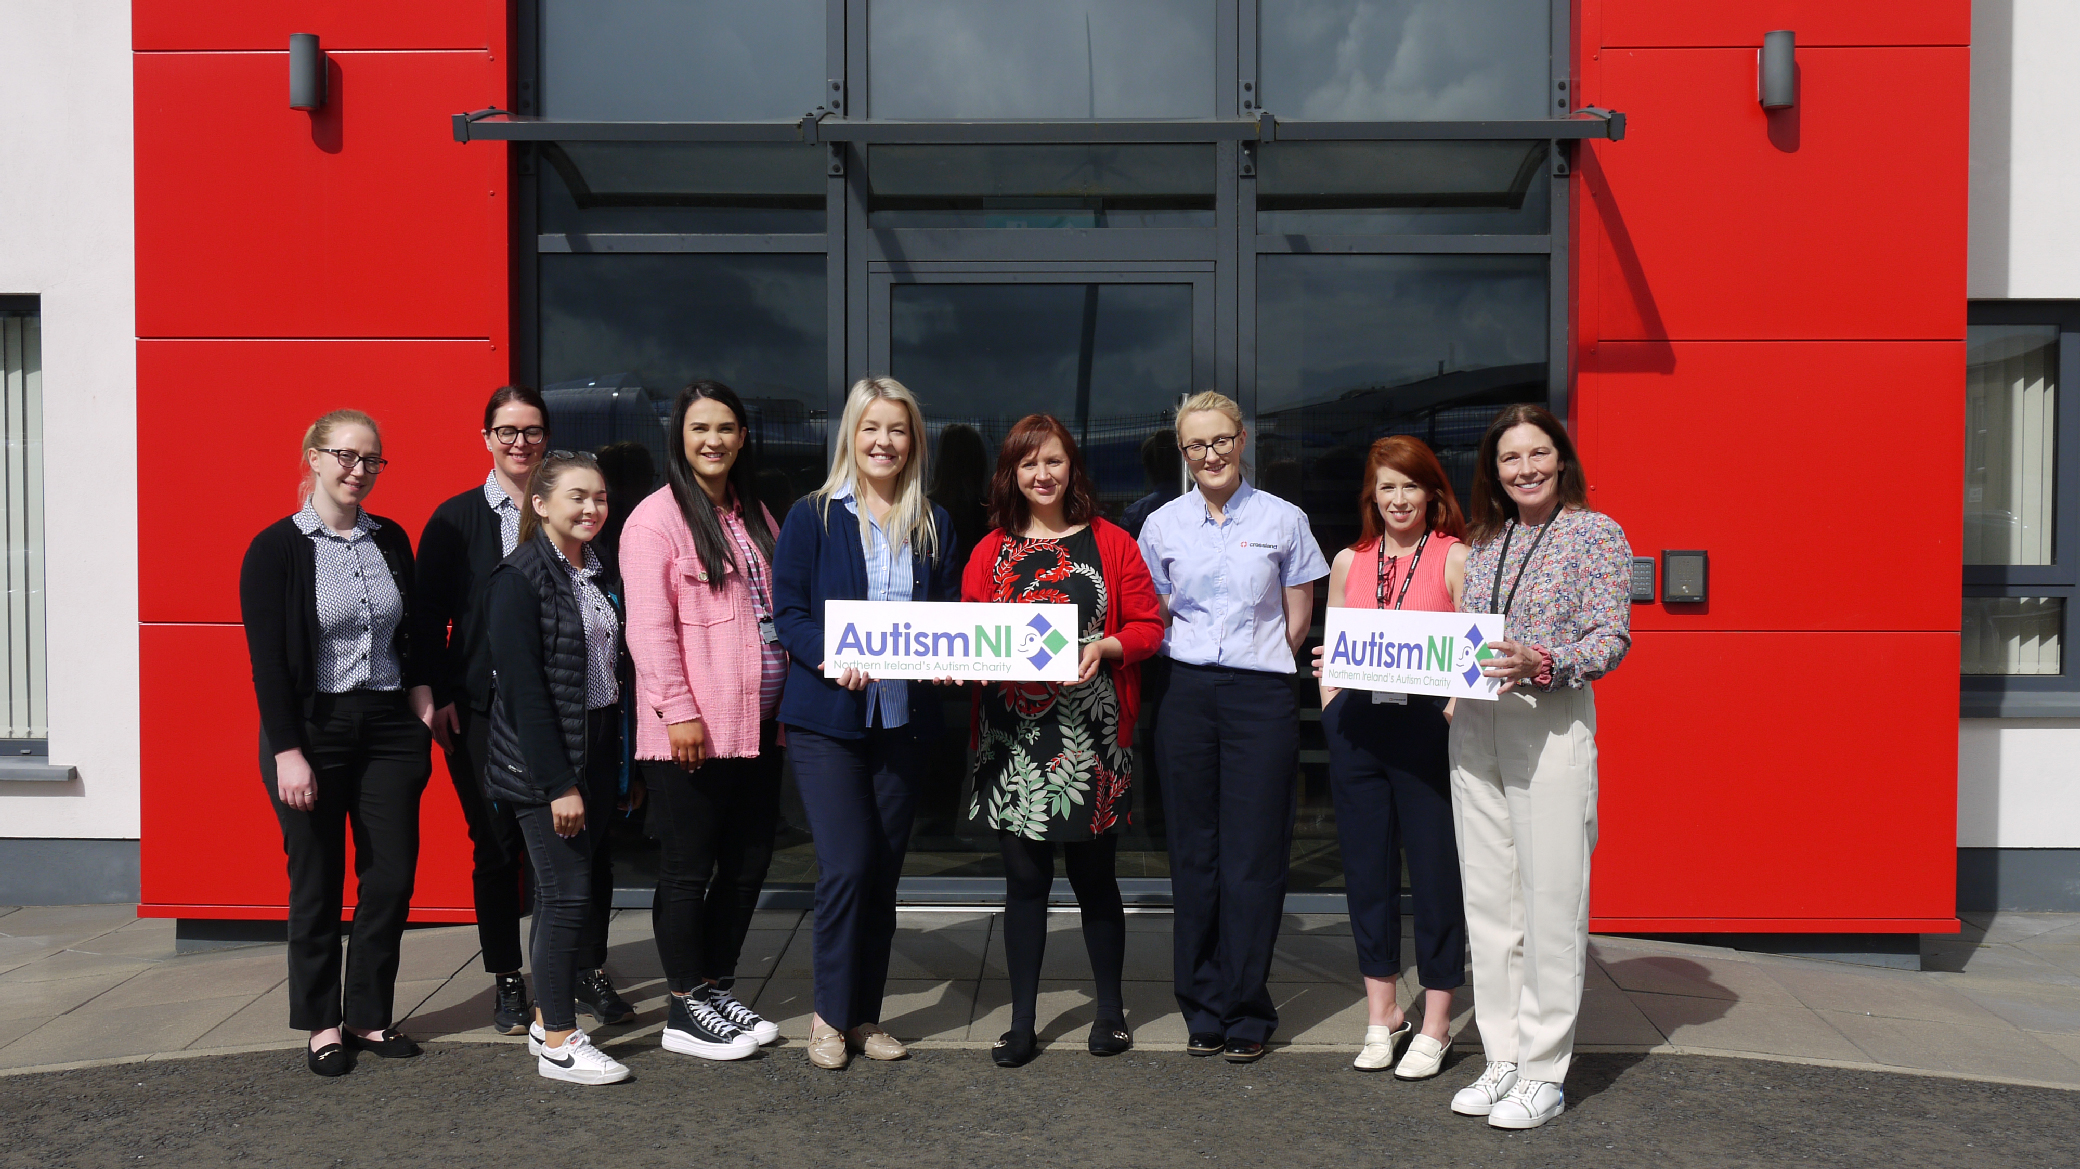 Crossland is proud to have raise a total of £2500 - AUTISM NI 